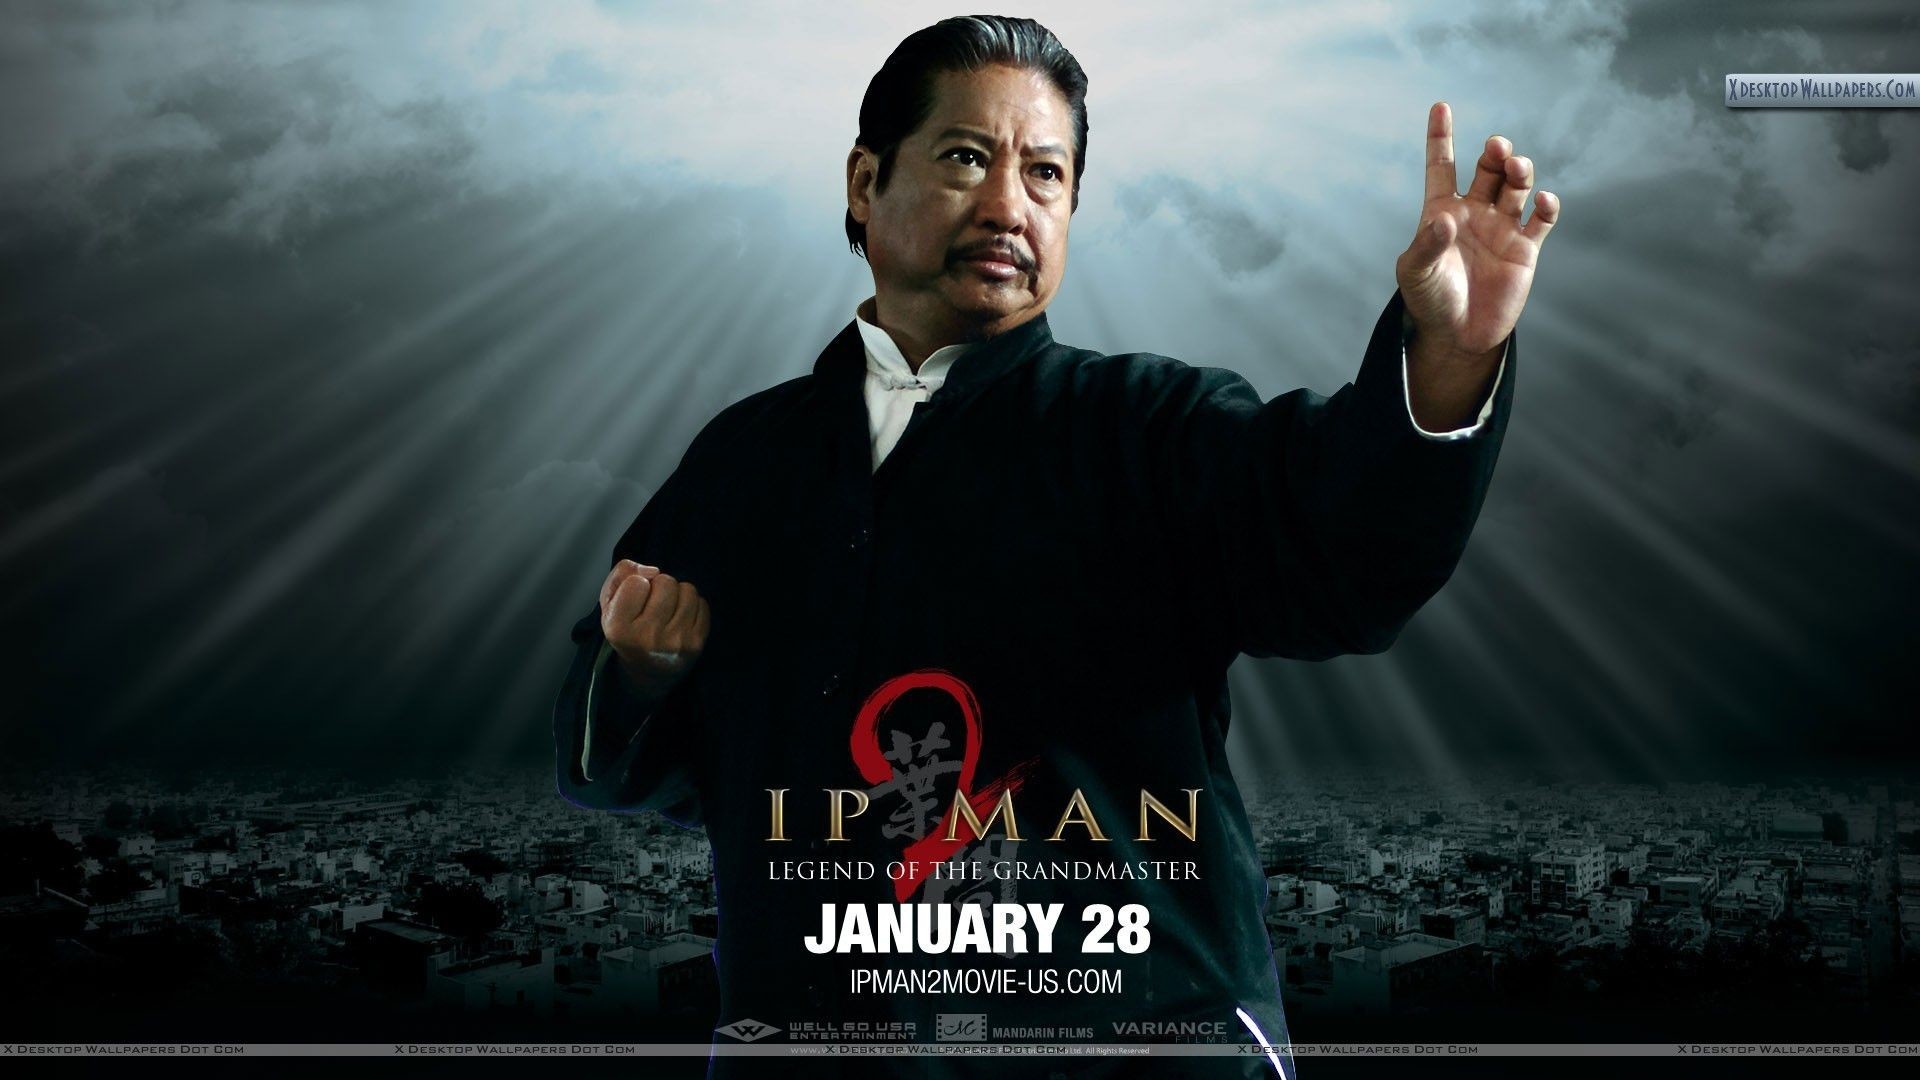 1920x1080 IP Man 2 Wallpapers, Photos Images in HD